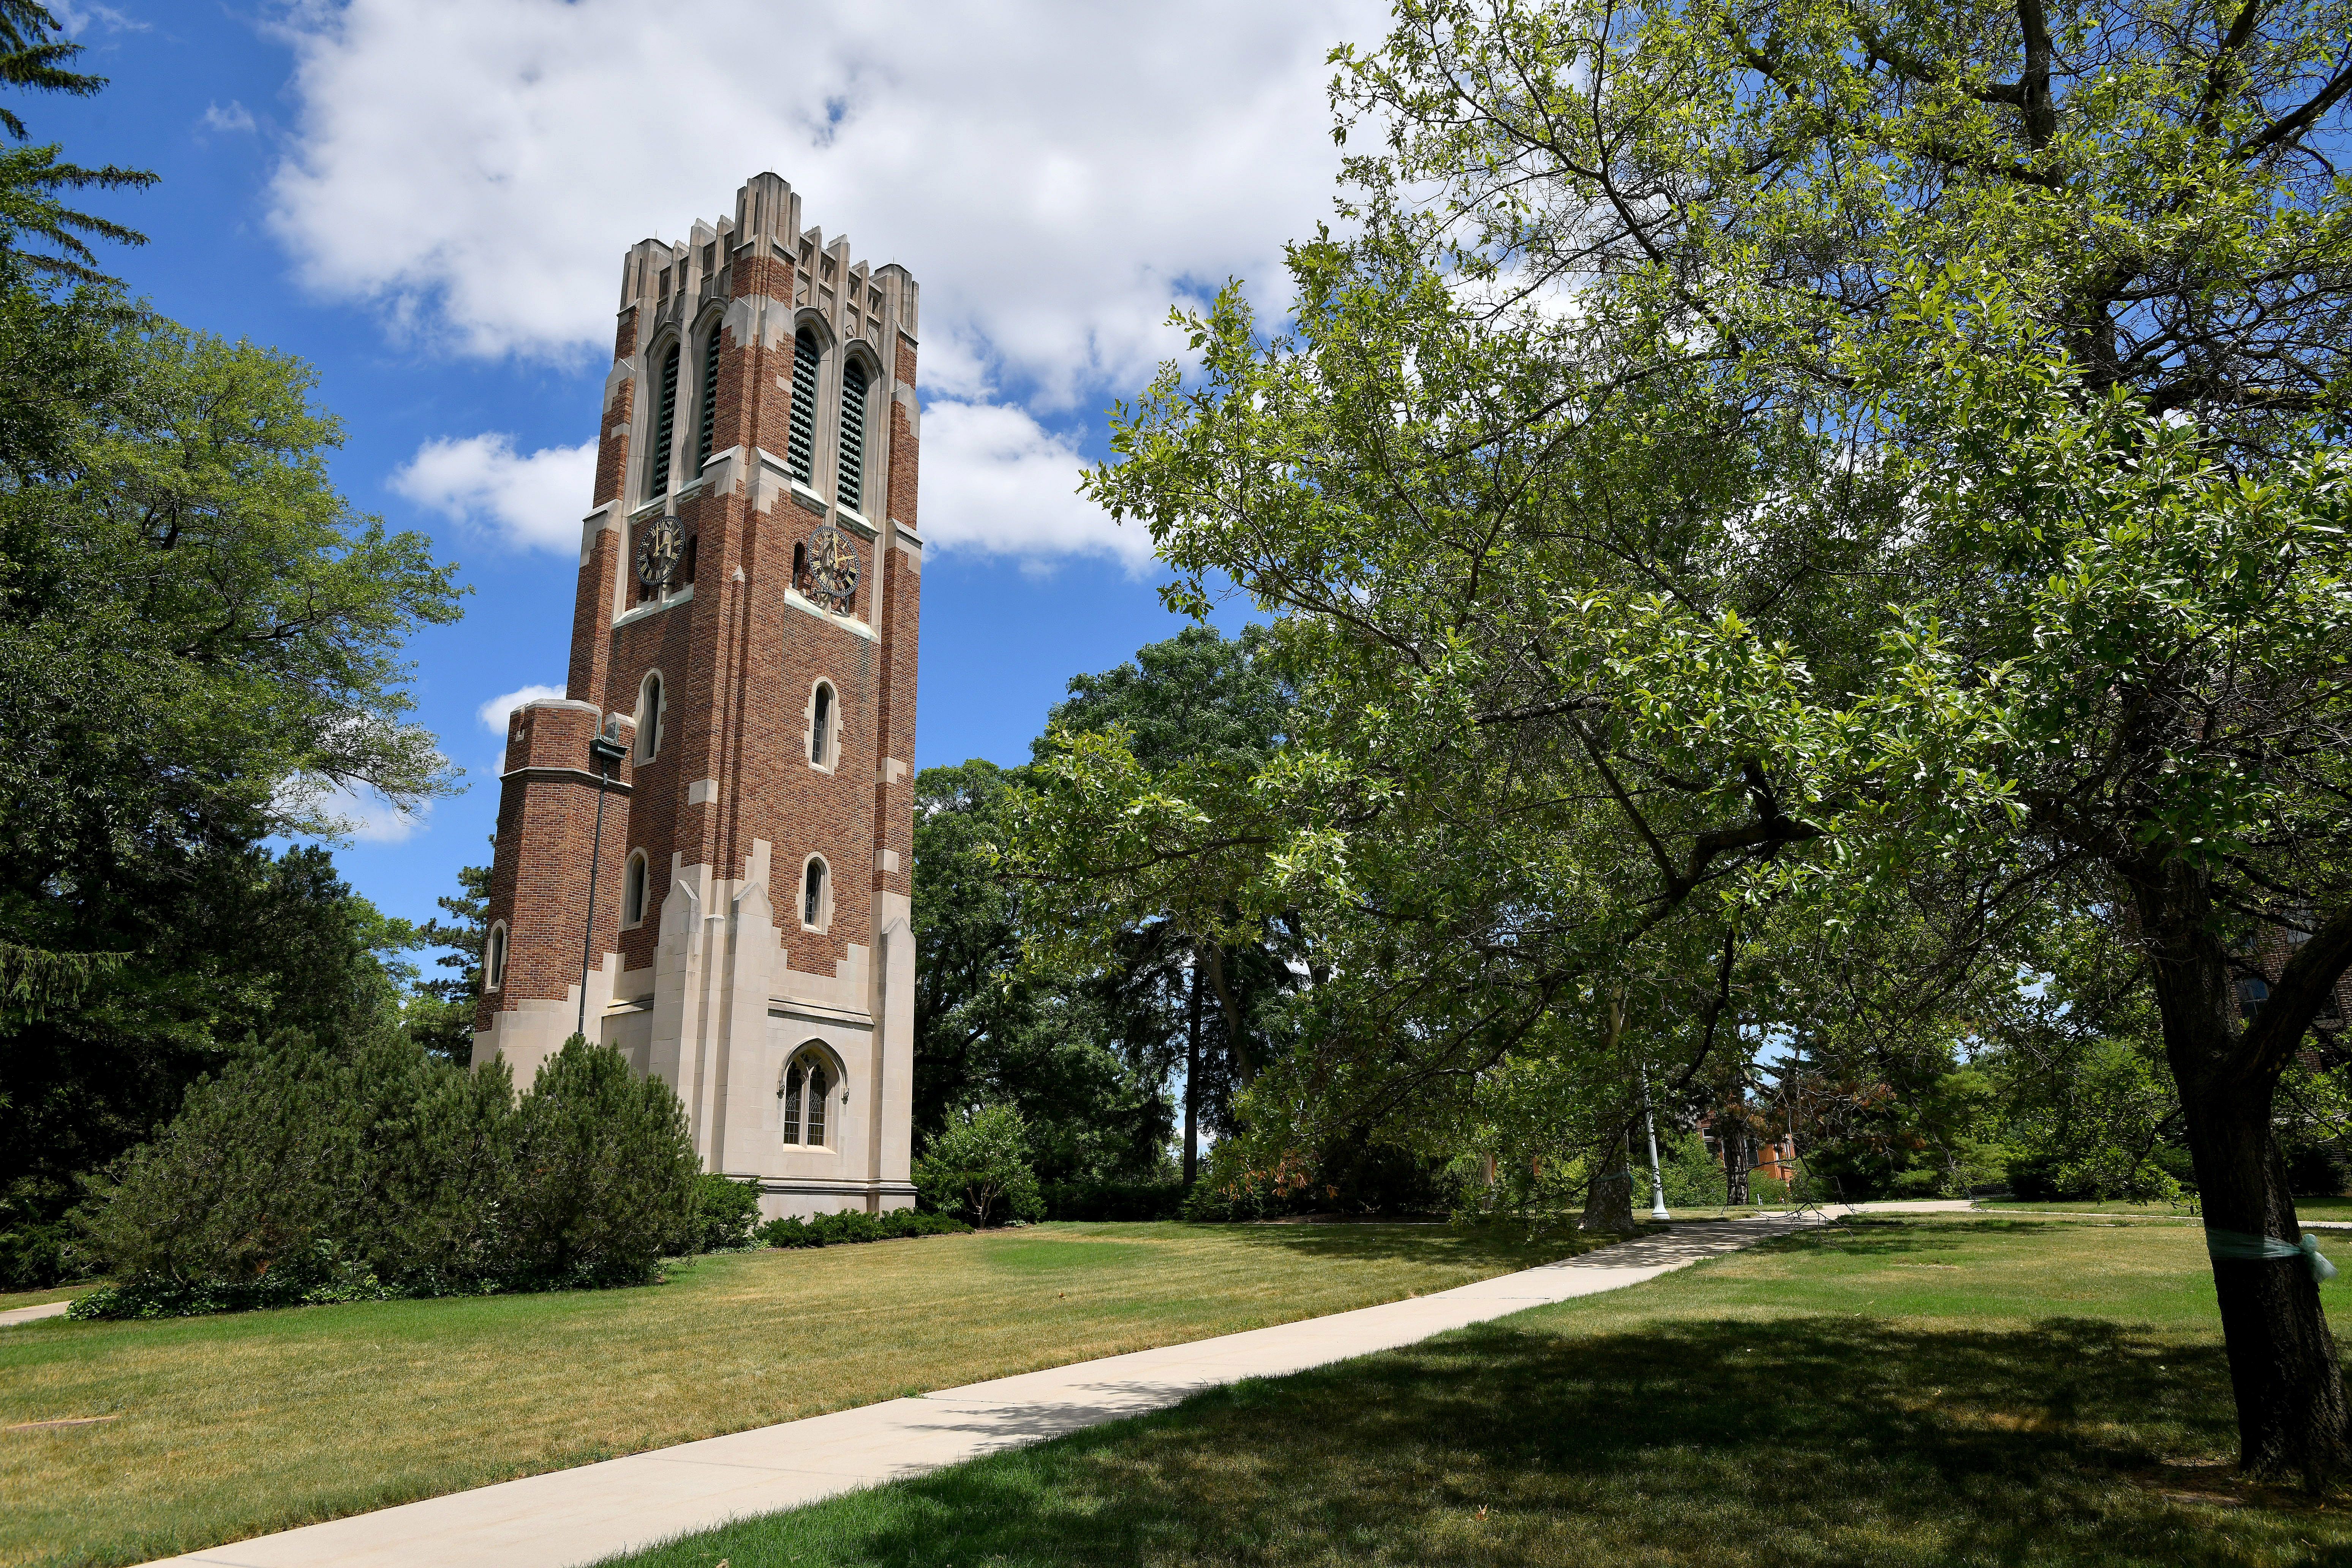 The Beaumont Tower stands on central campus at Michigan State University's East Lansing campus on July 2, 2018.